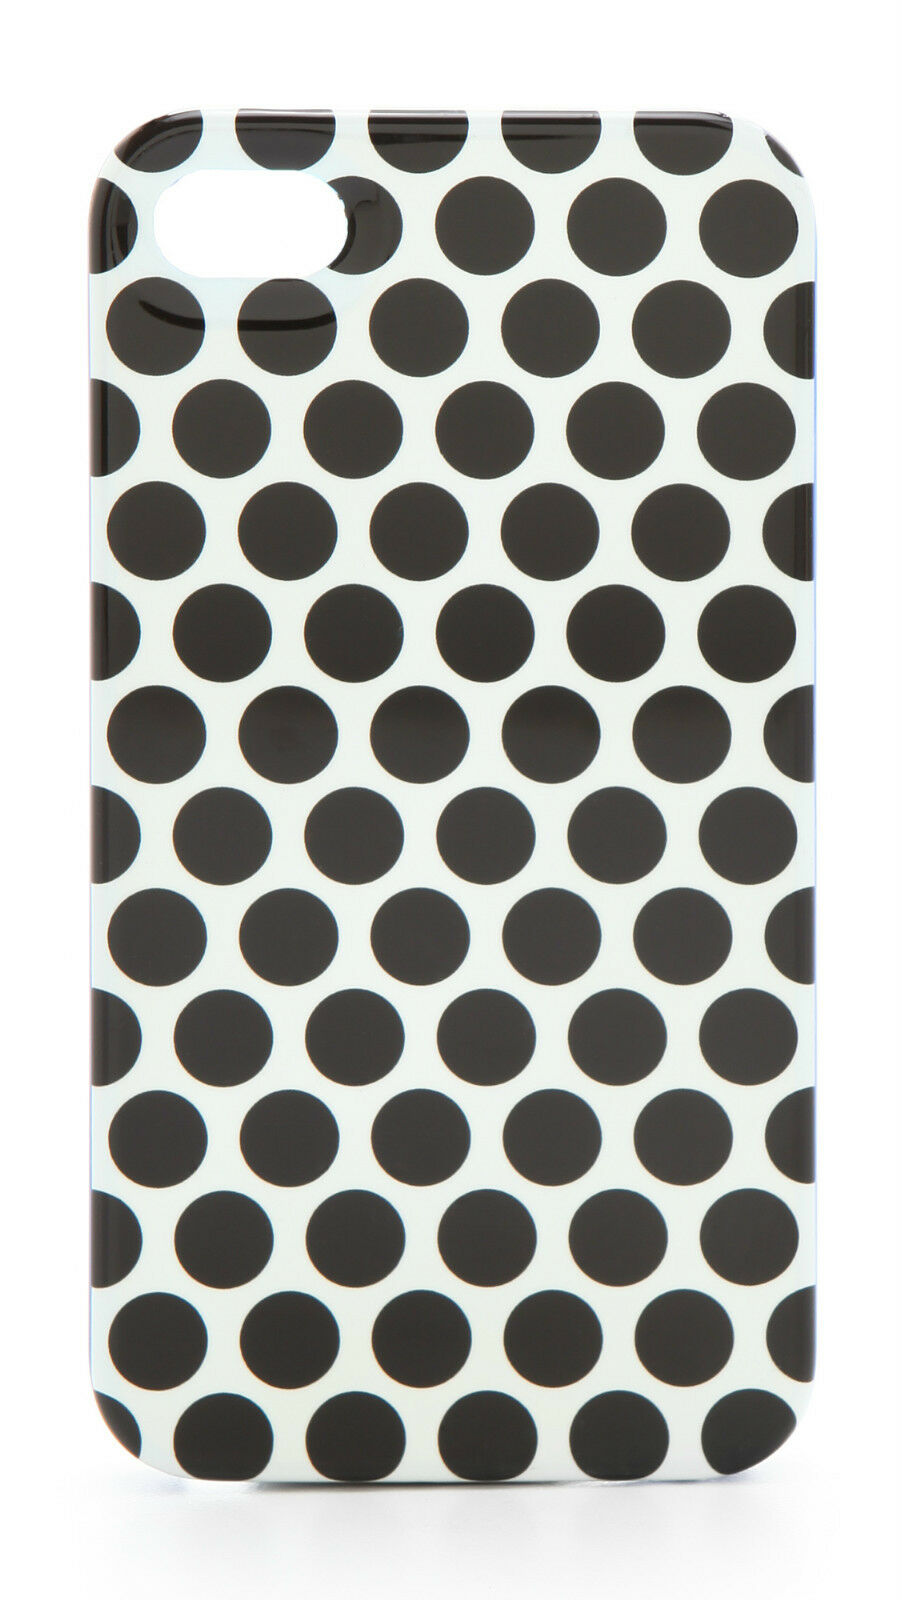 Juicy Couture White Black Polka Dot iPhone 4/4S Hard Shell Case YTRUT232 NWT